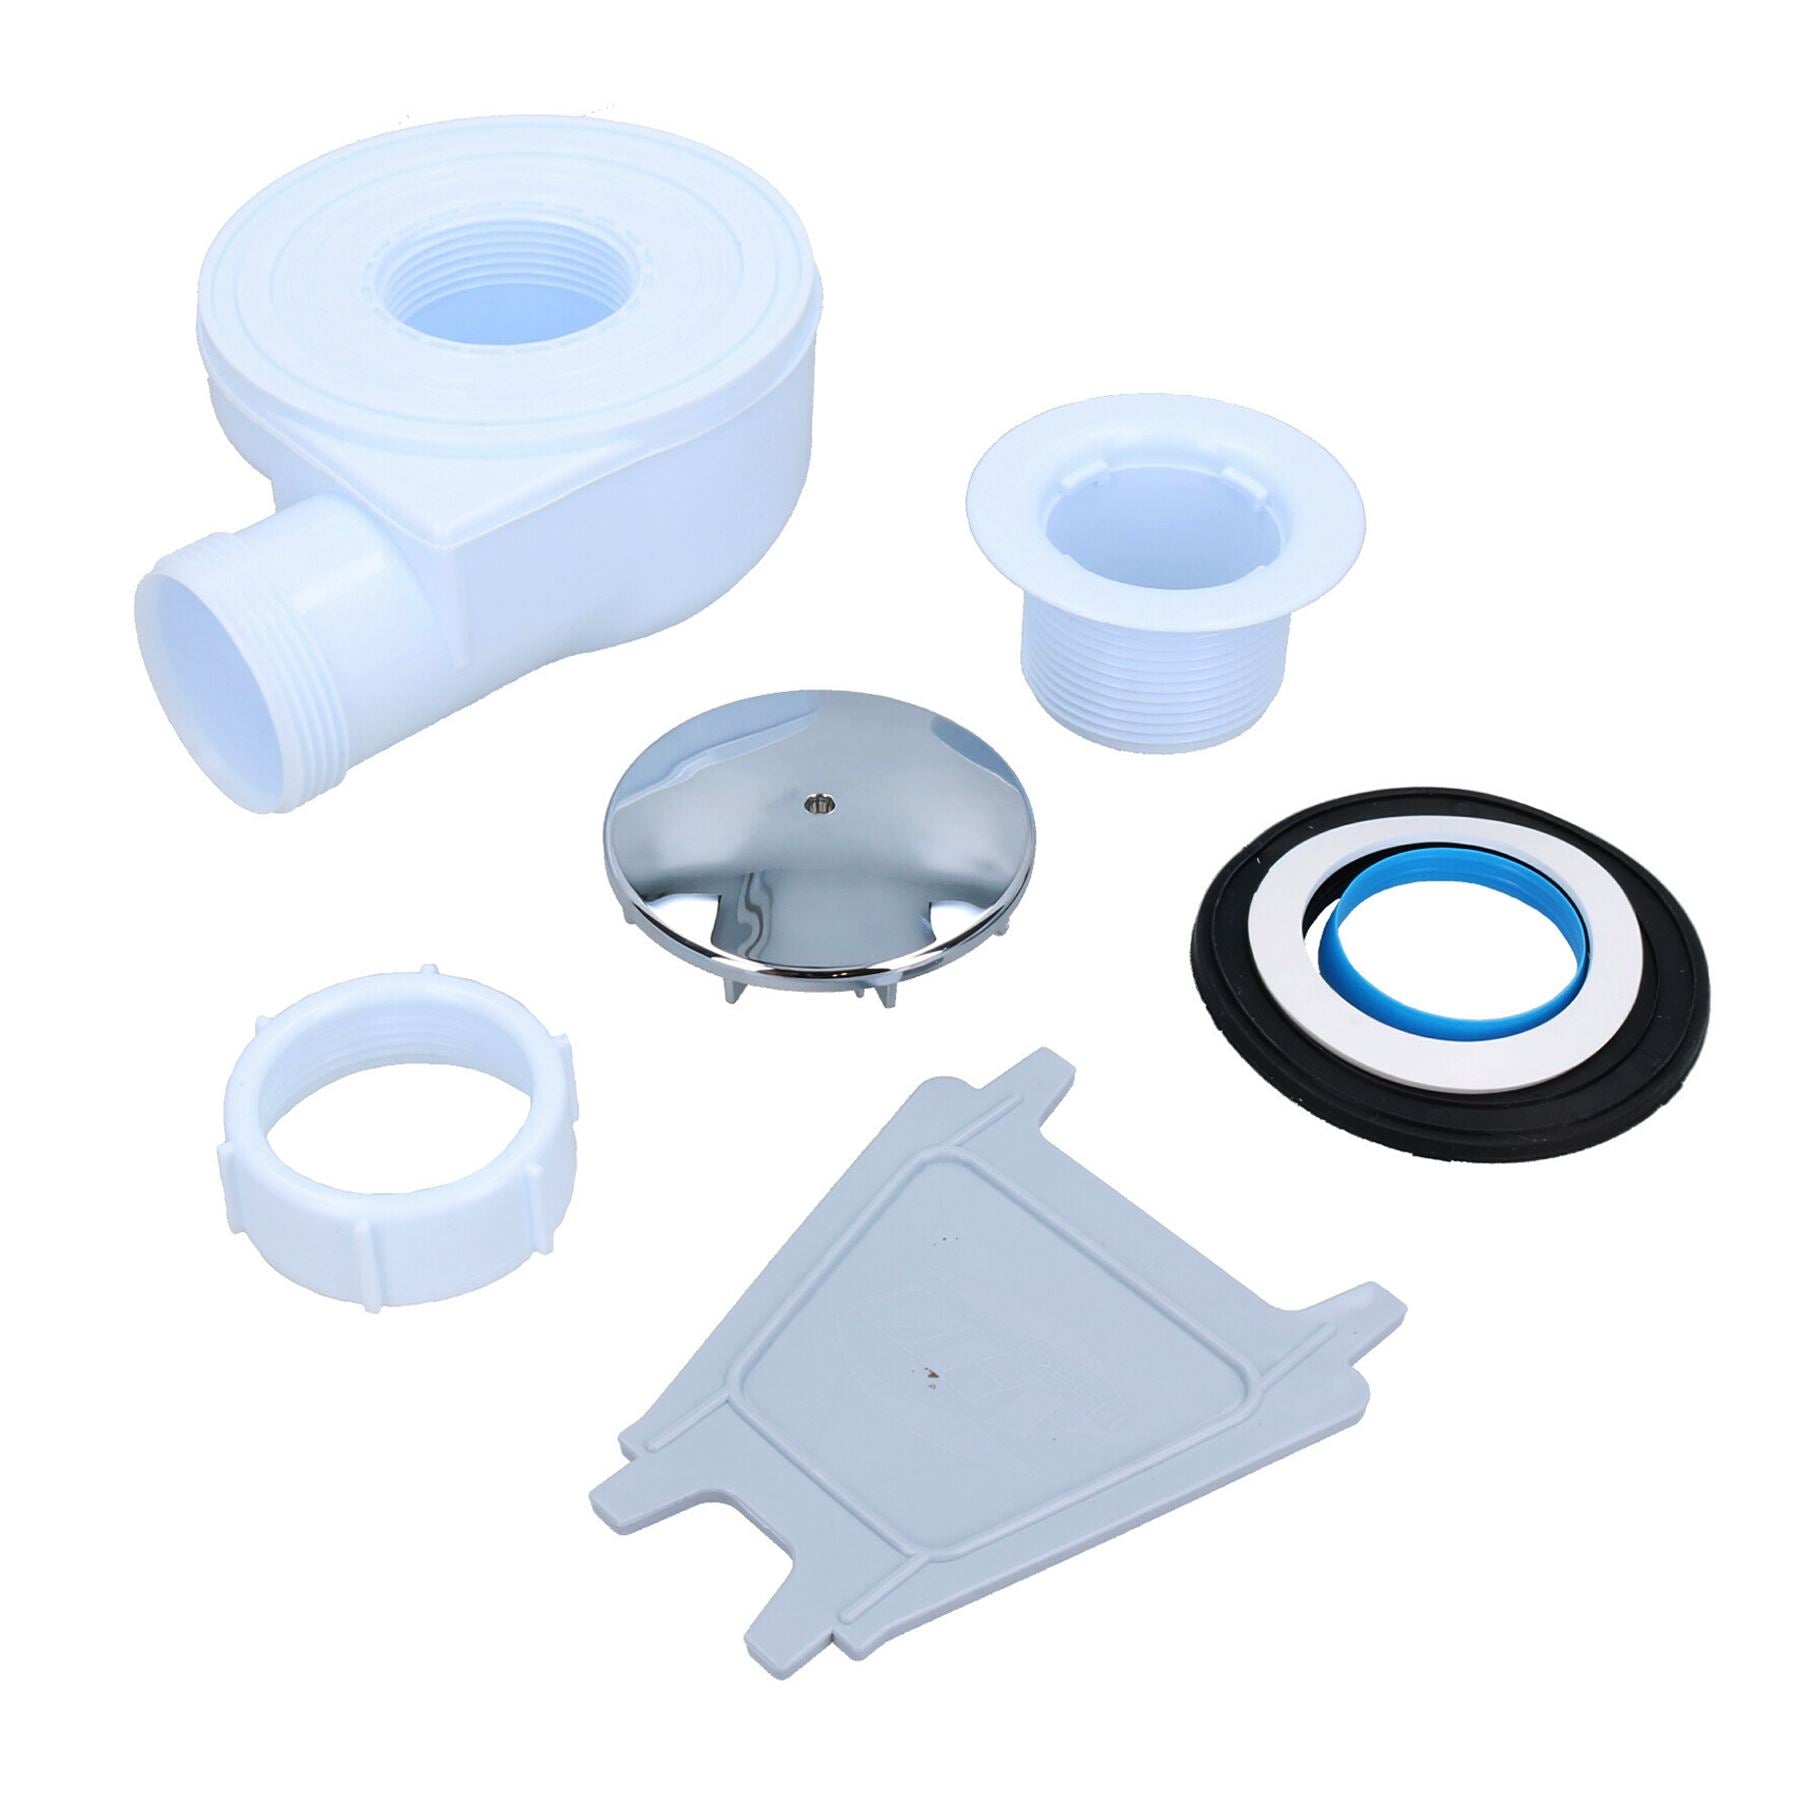 70mm Durable Polypropylene Mushroom Top Shower Trap with 40mm Connectors